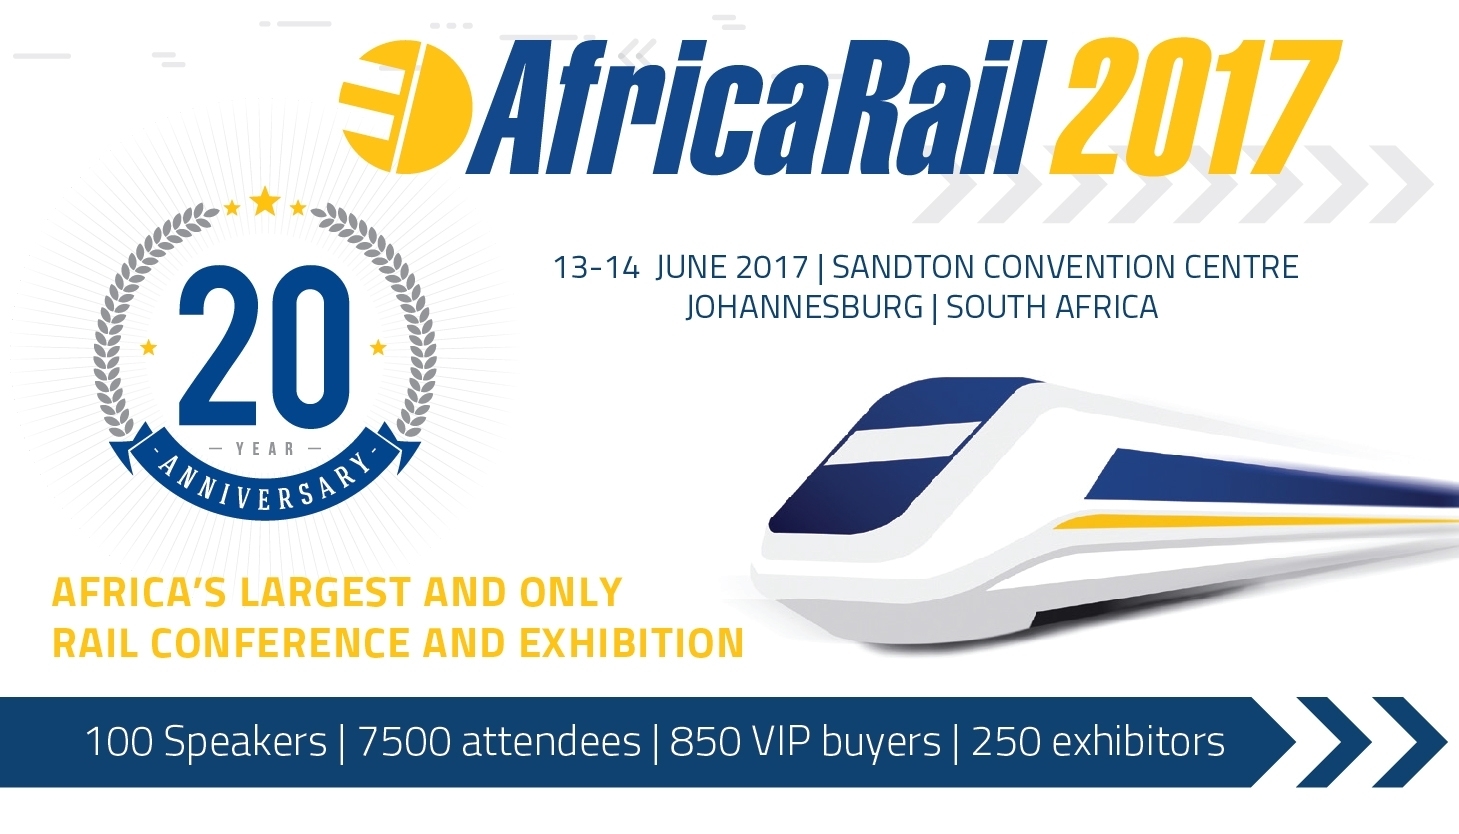 20th Anniversary Of Africa Rail Conference And Exhibition